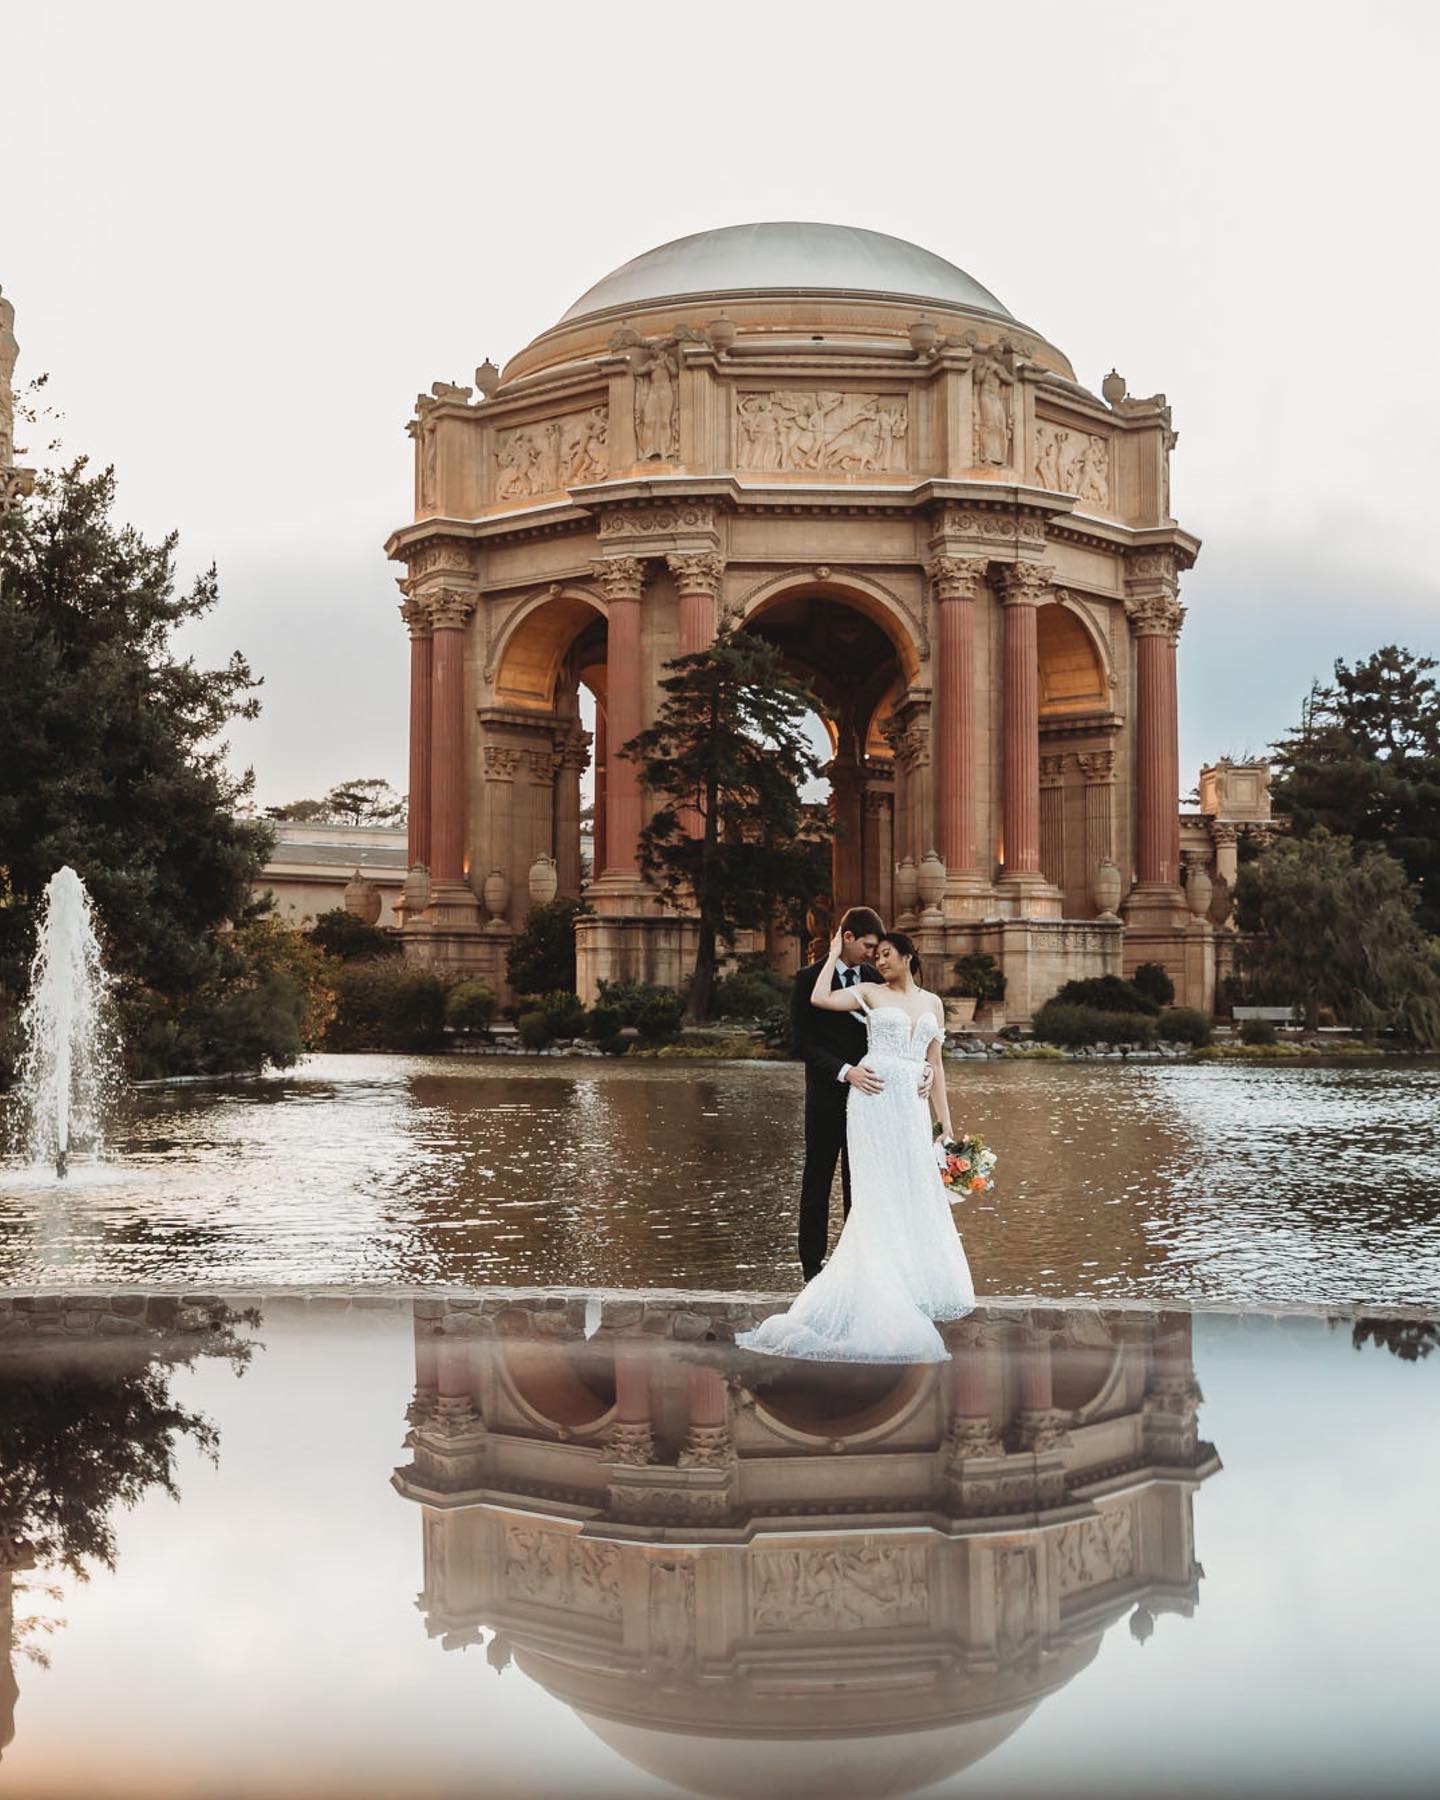 a couple posing in front of a beautiful landmark with fountains reflections in wedding photography